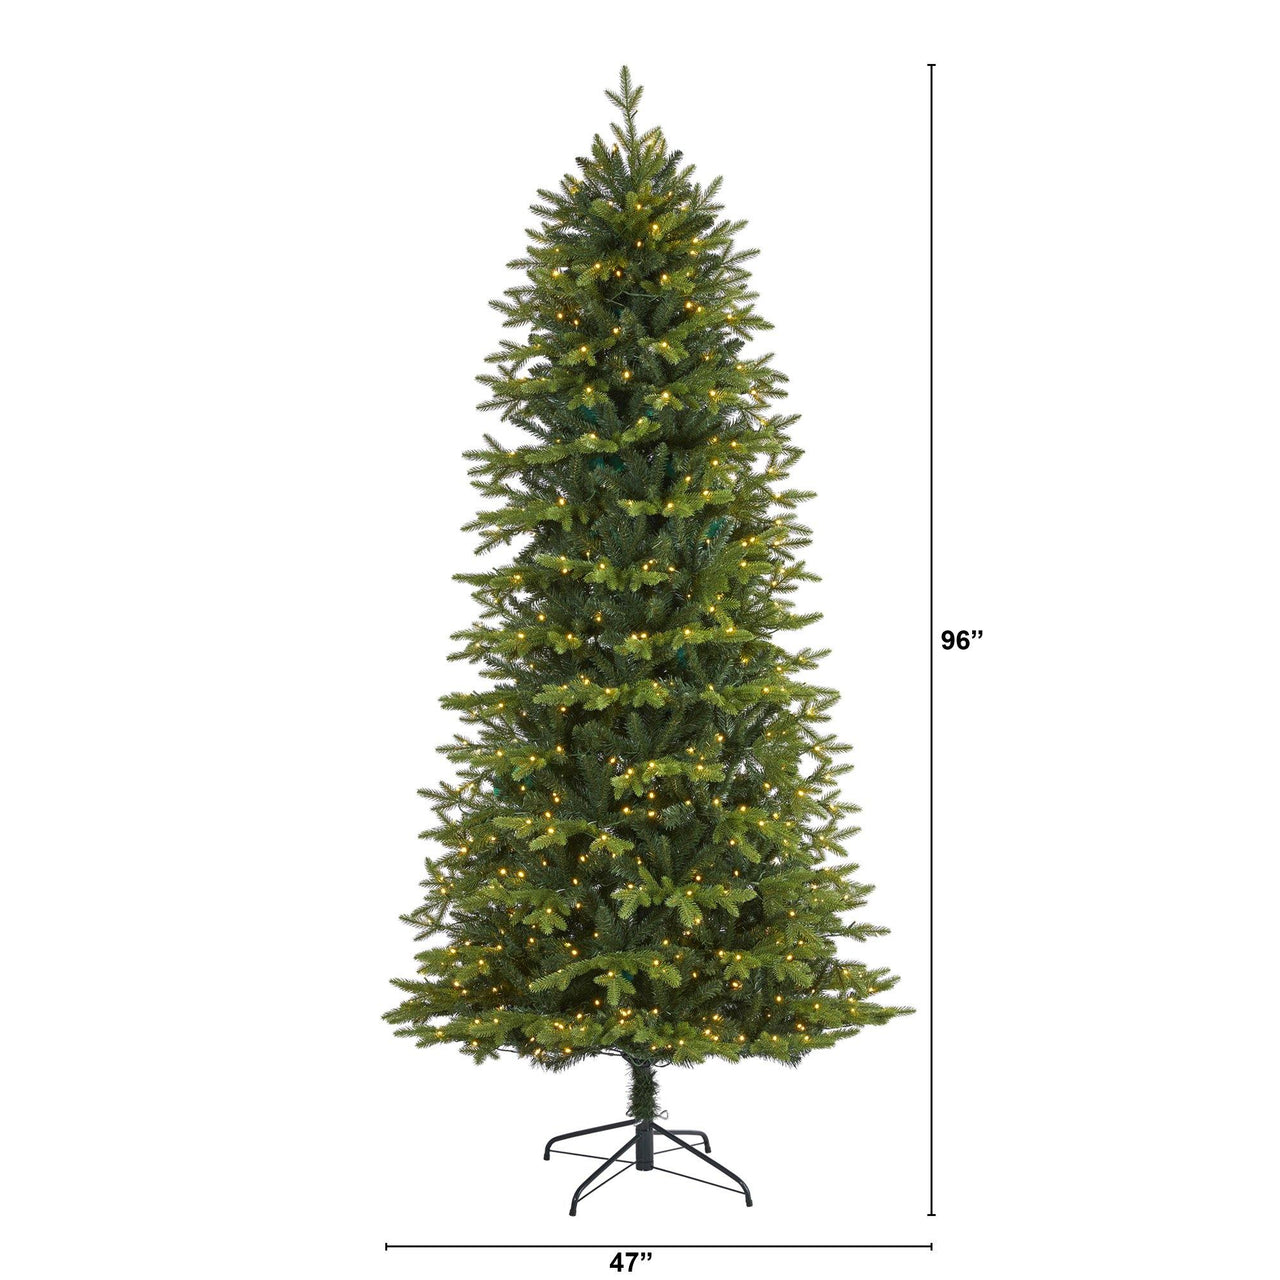 8’ Belgium Fir “Natural Look” Artificial Christmas Tree with 650 Clear LED Lights - The Fox Decor